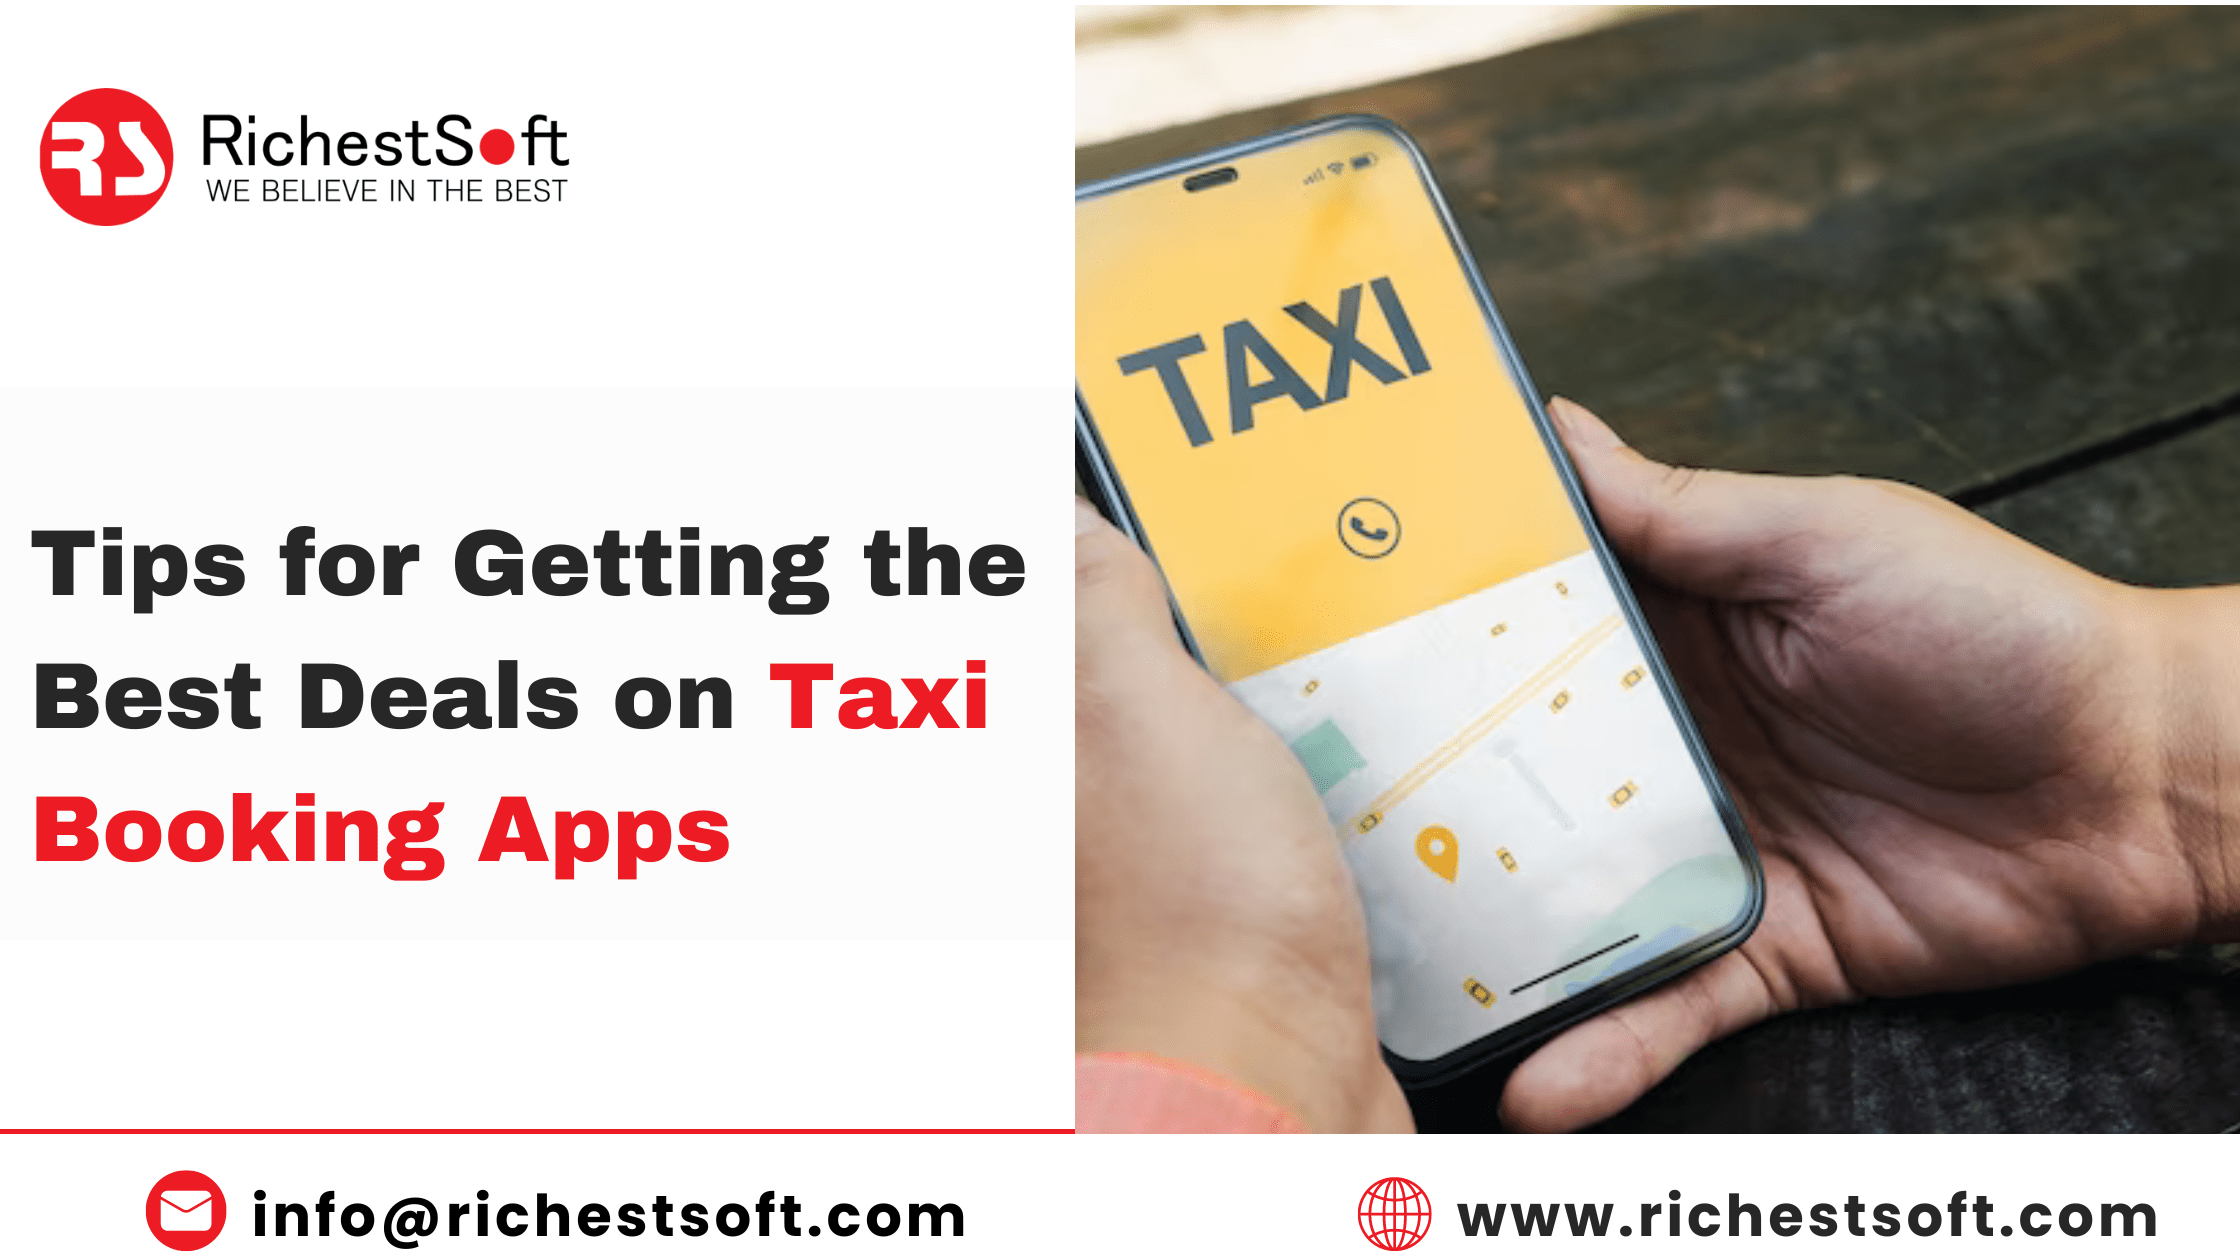 Tips for Getting the Best Deals on Taxi Booking Apps